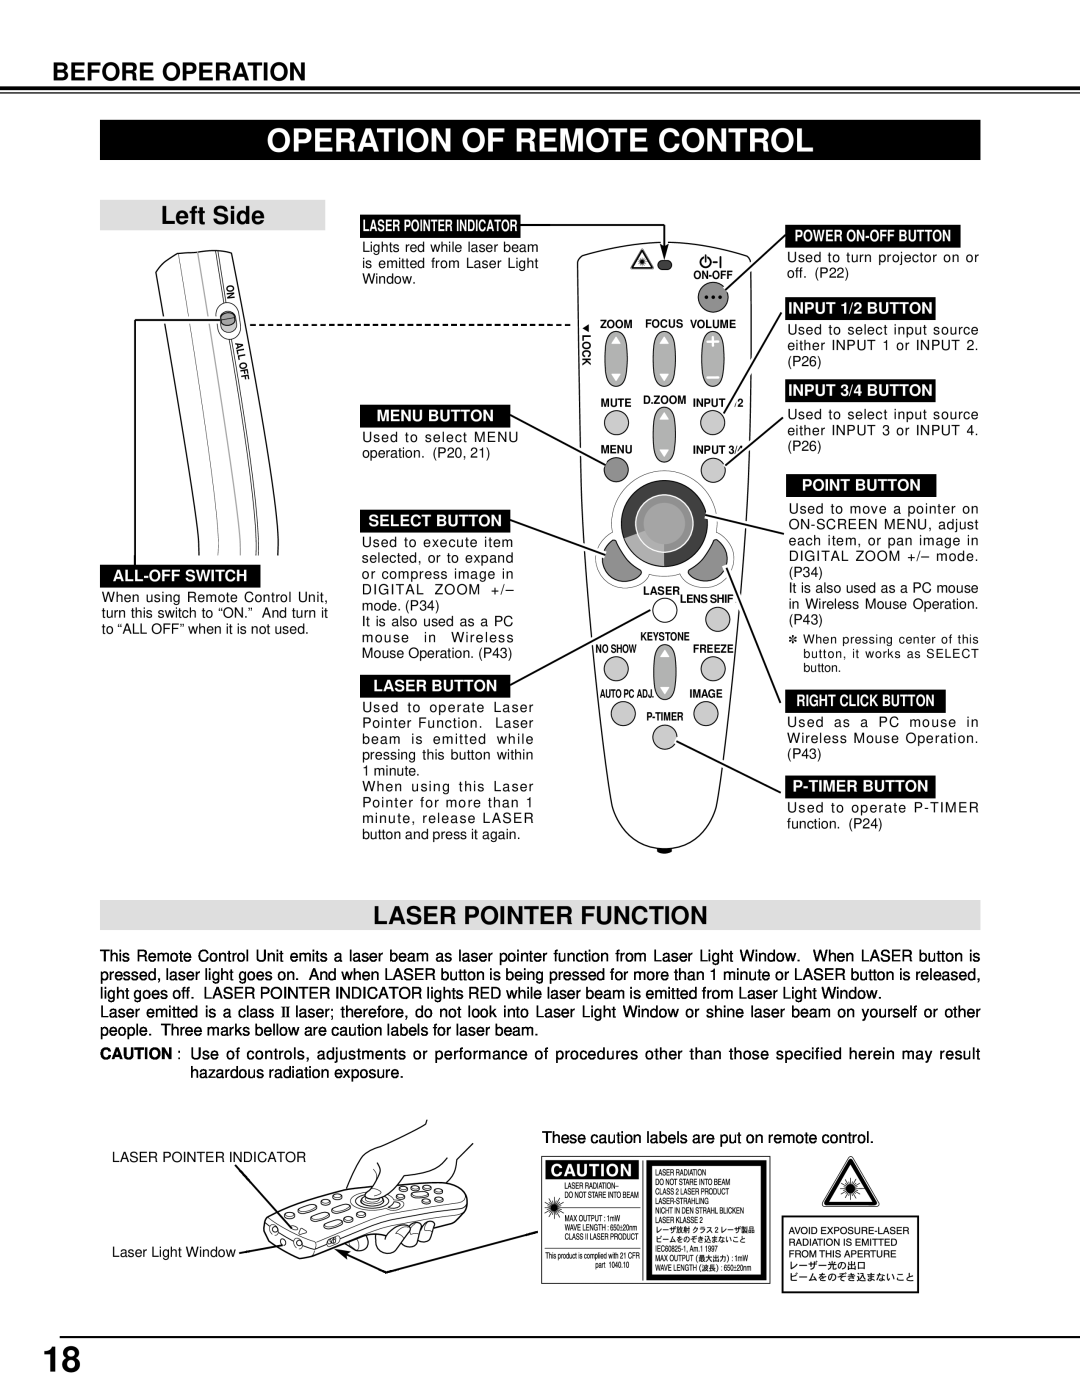 Eiki LC-XT2 instruction manual Operation Of Remote Control, Before Operation, Left Side, Laser Pointer Function 